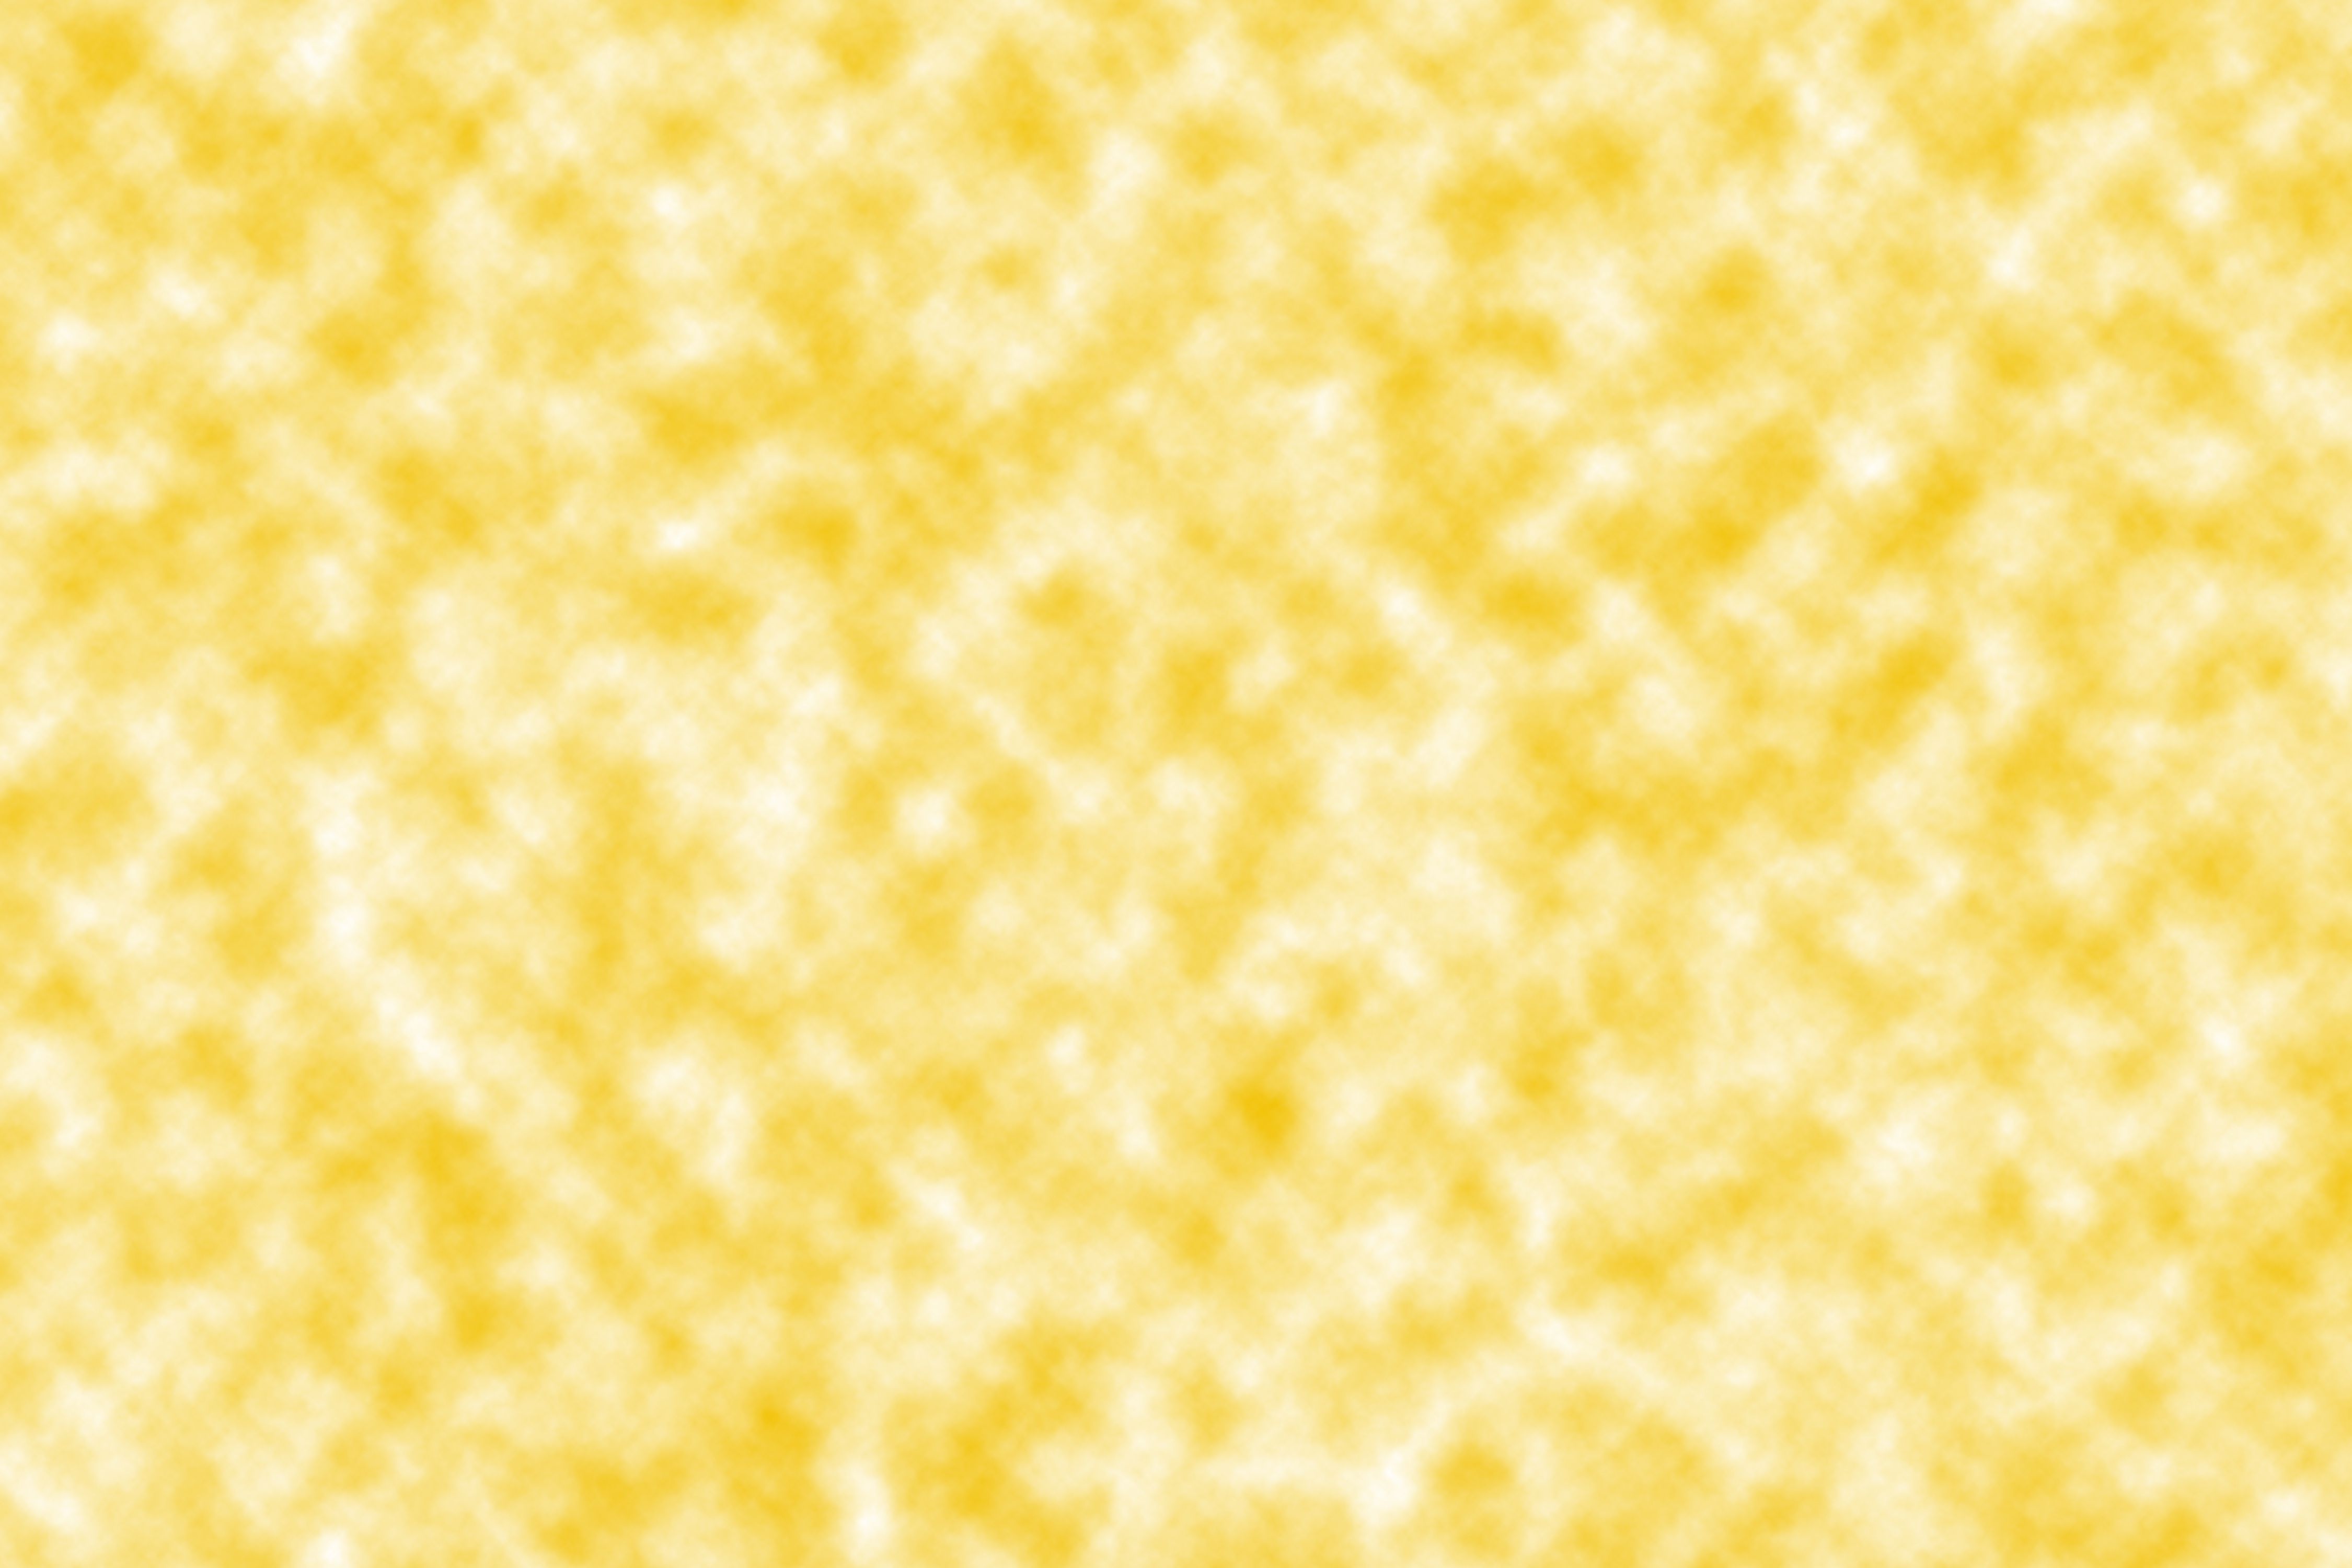 Light background with yellow spots.